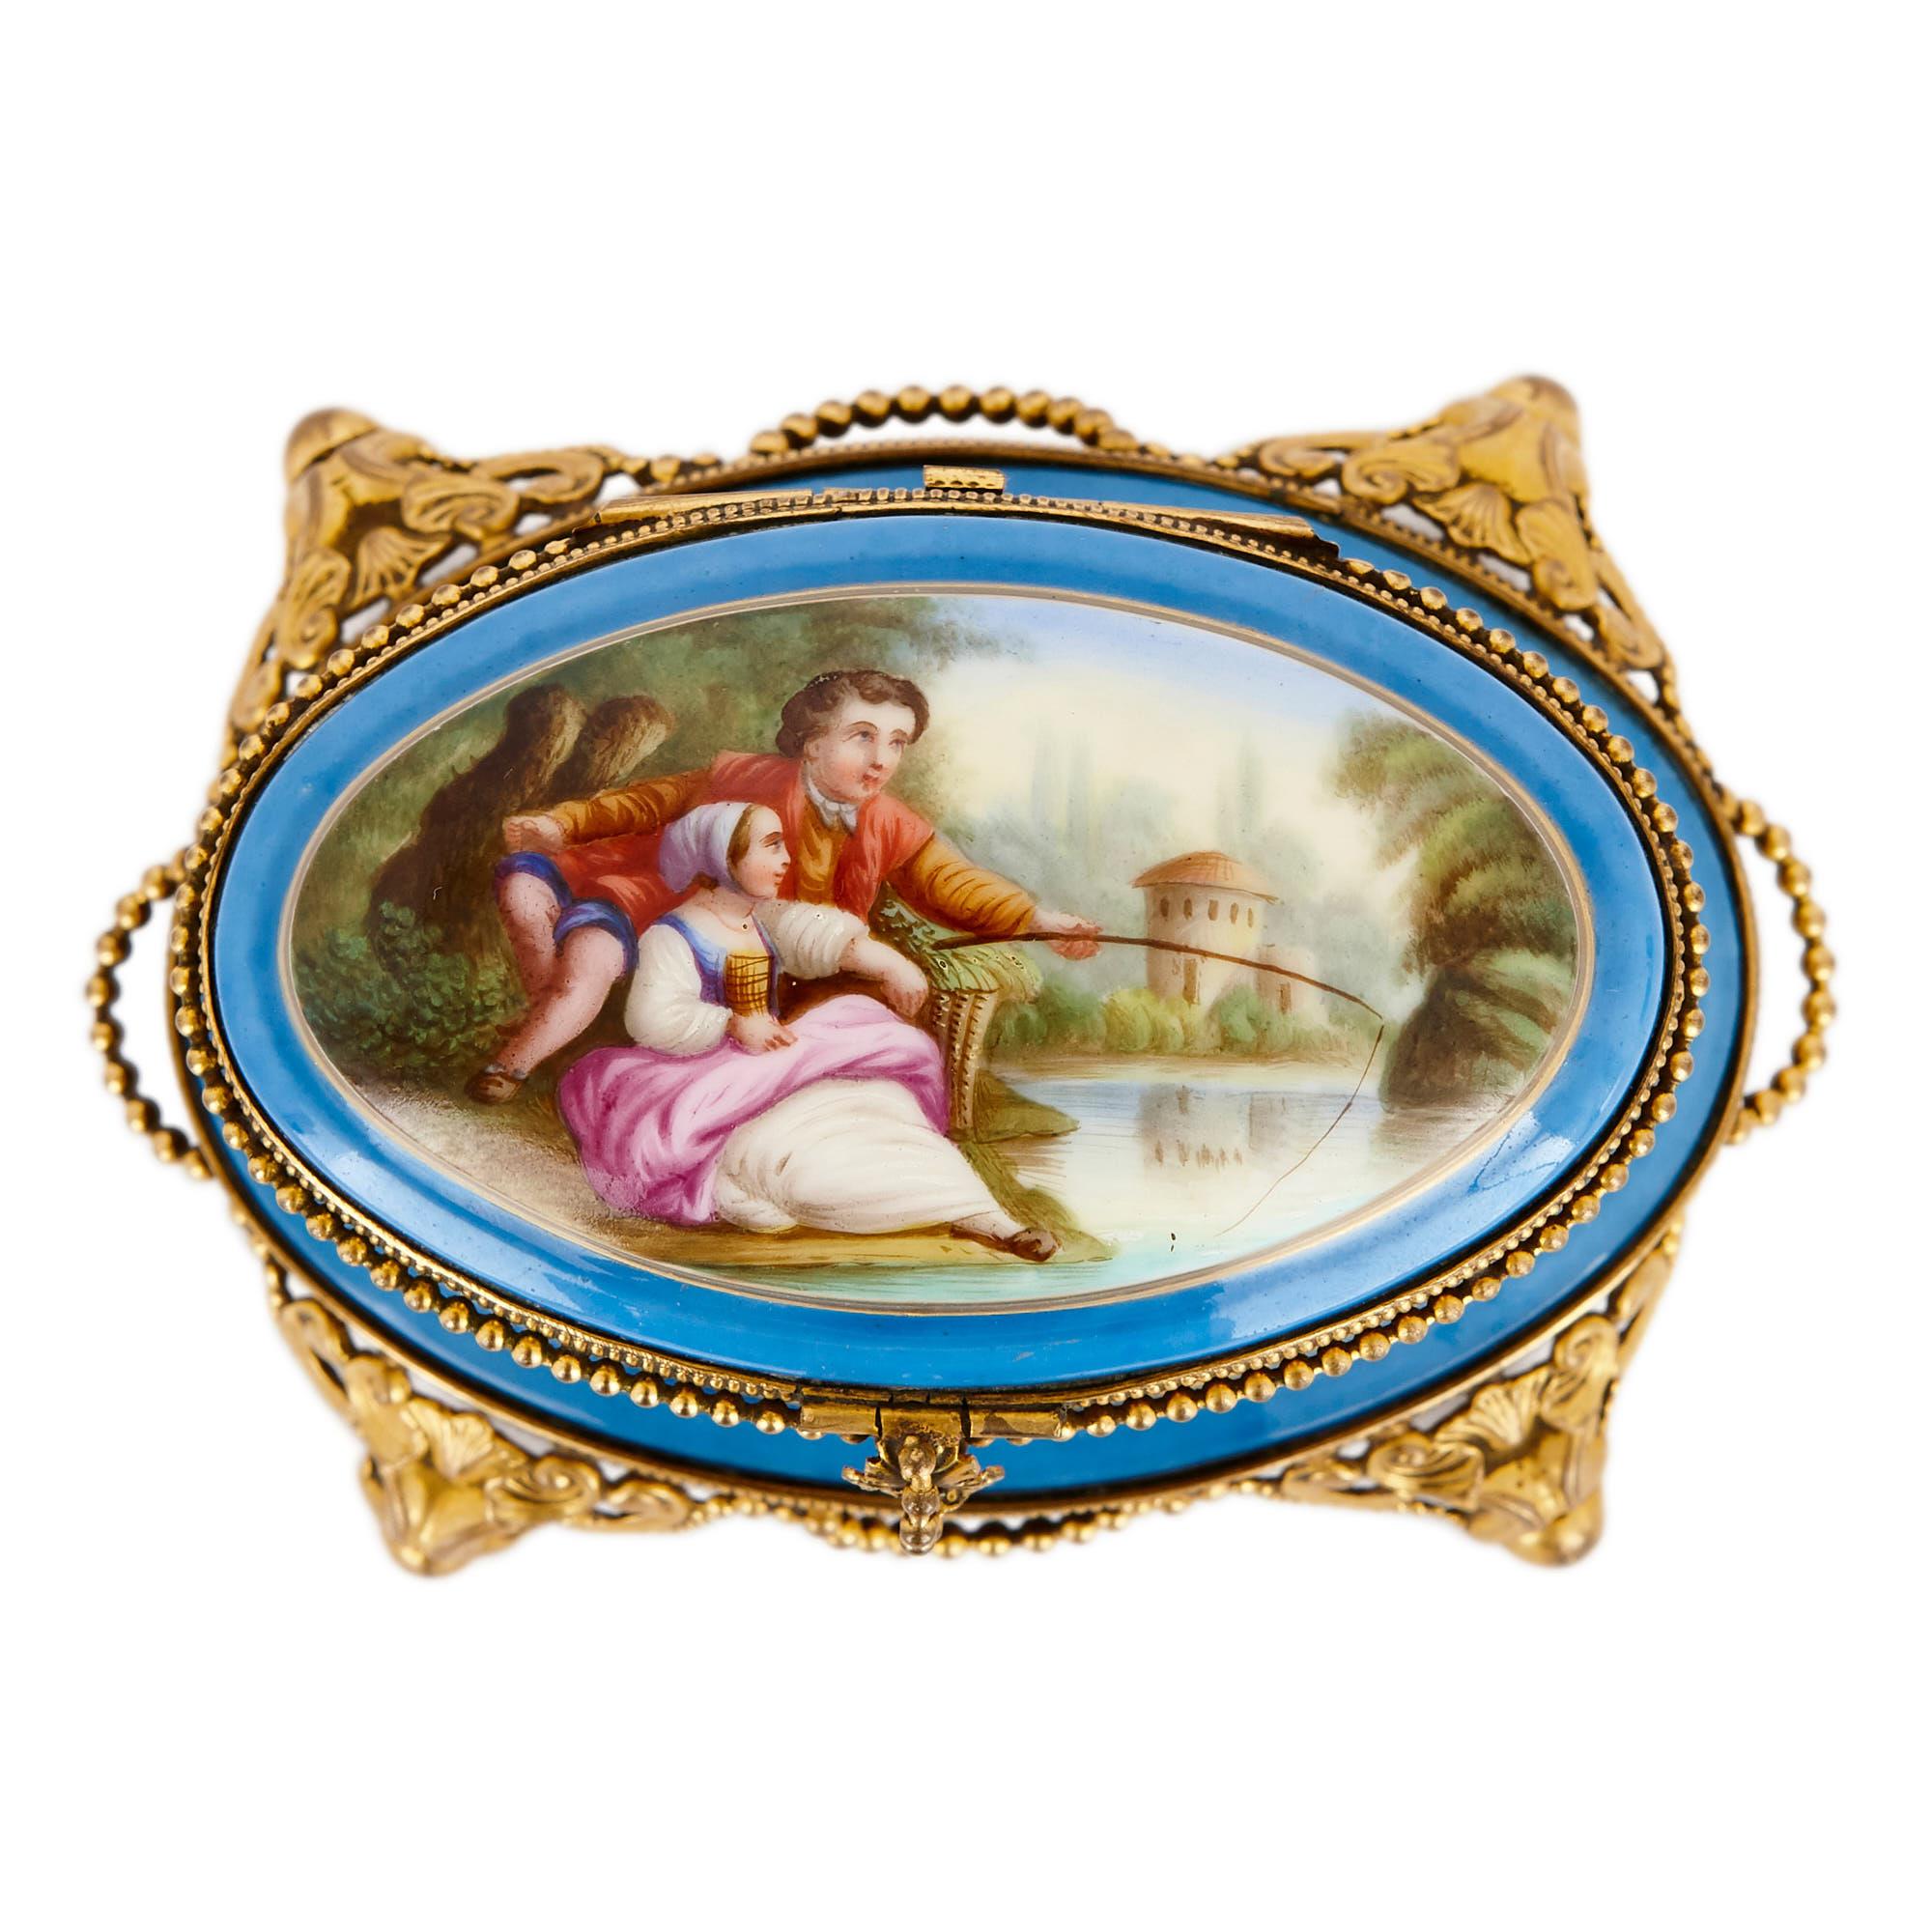 Rococo Antique French Sevres Style Porcelain Perfume Box